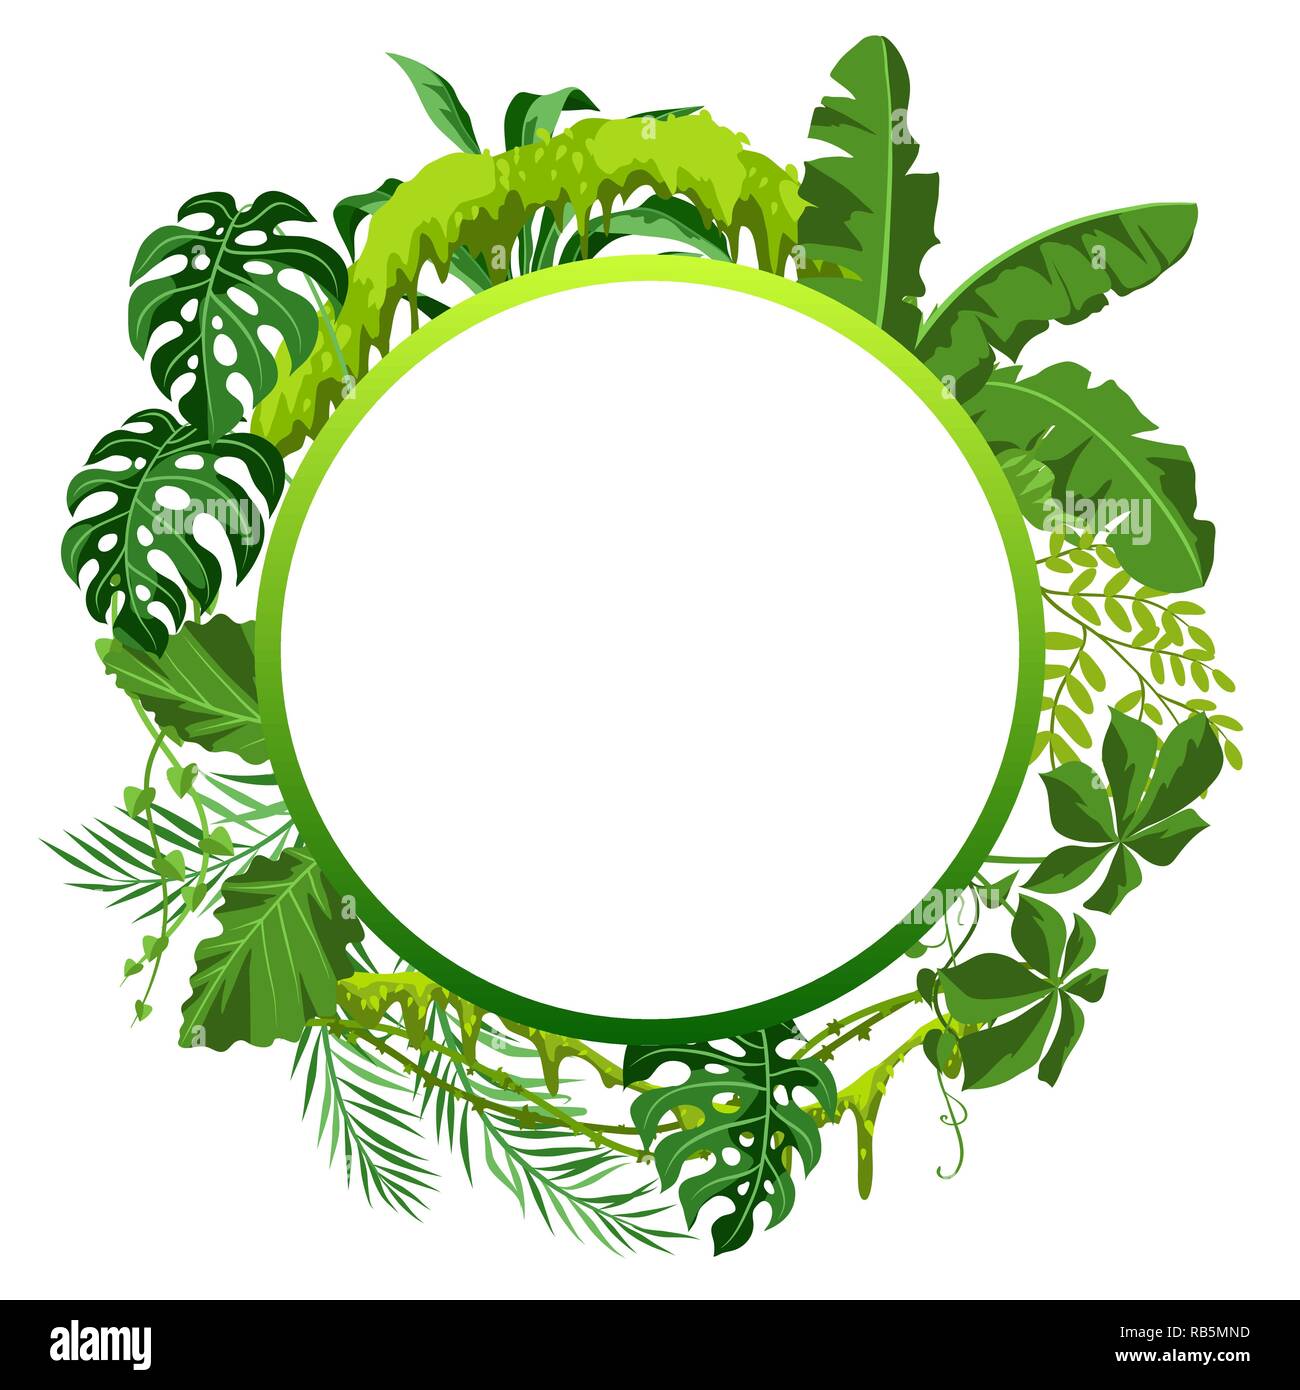 Background with jungle plants. Stock Vector